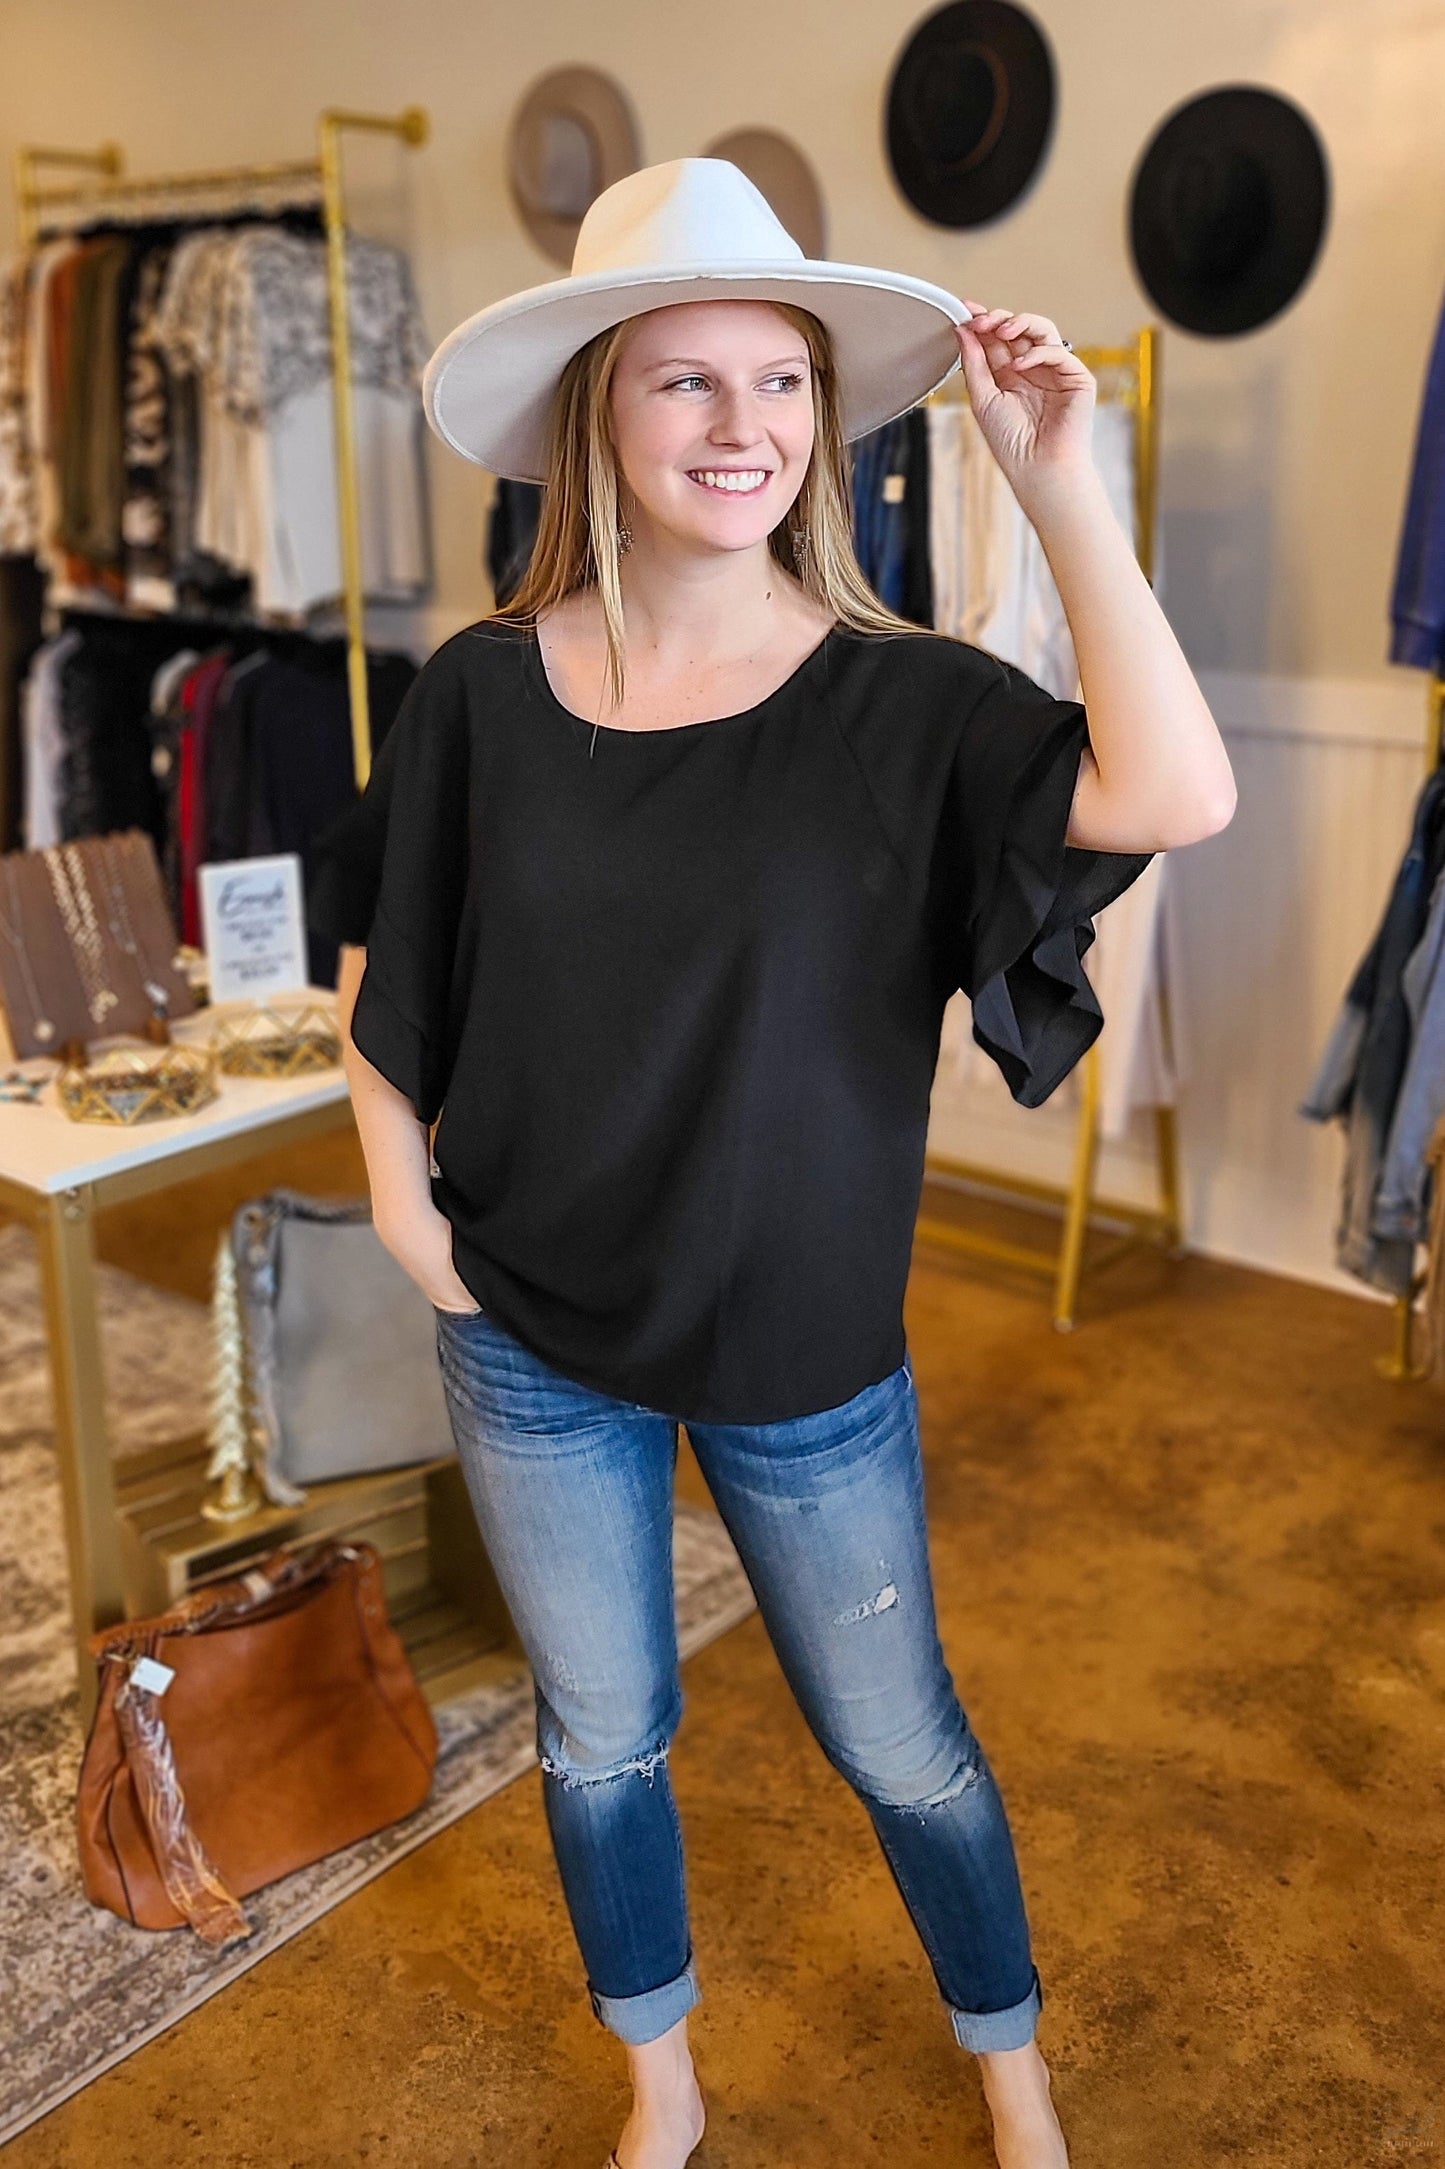 The Kallie Ruffle Top - Essential Southern Charm